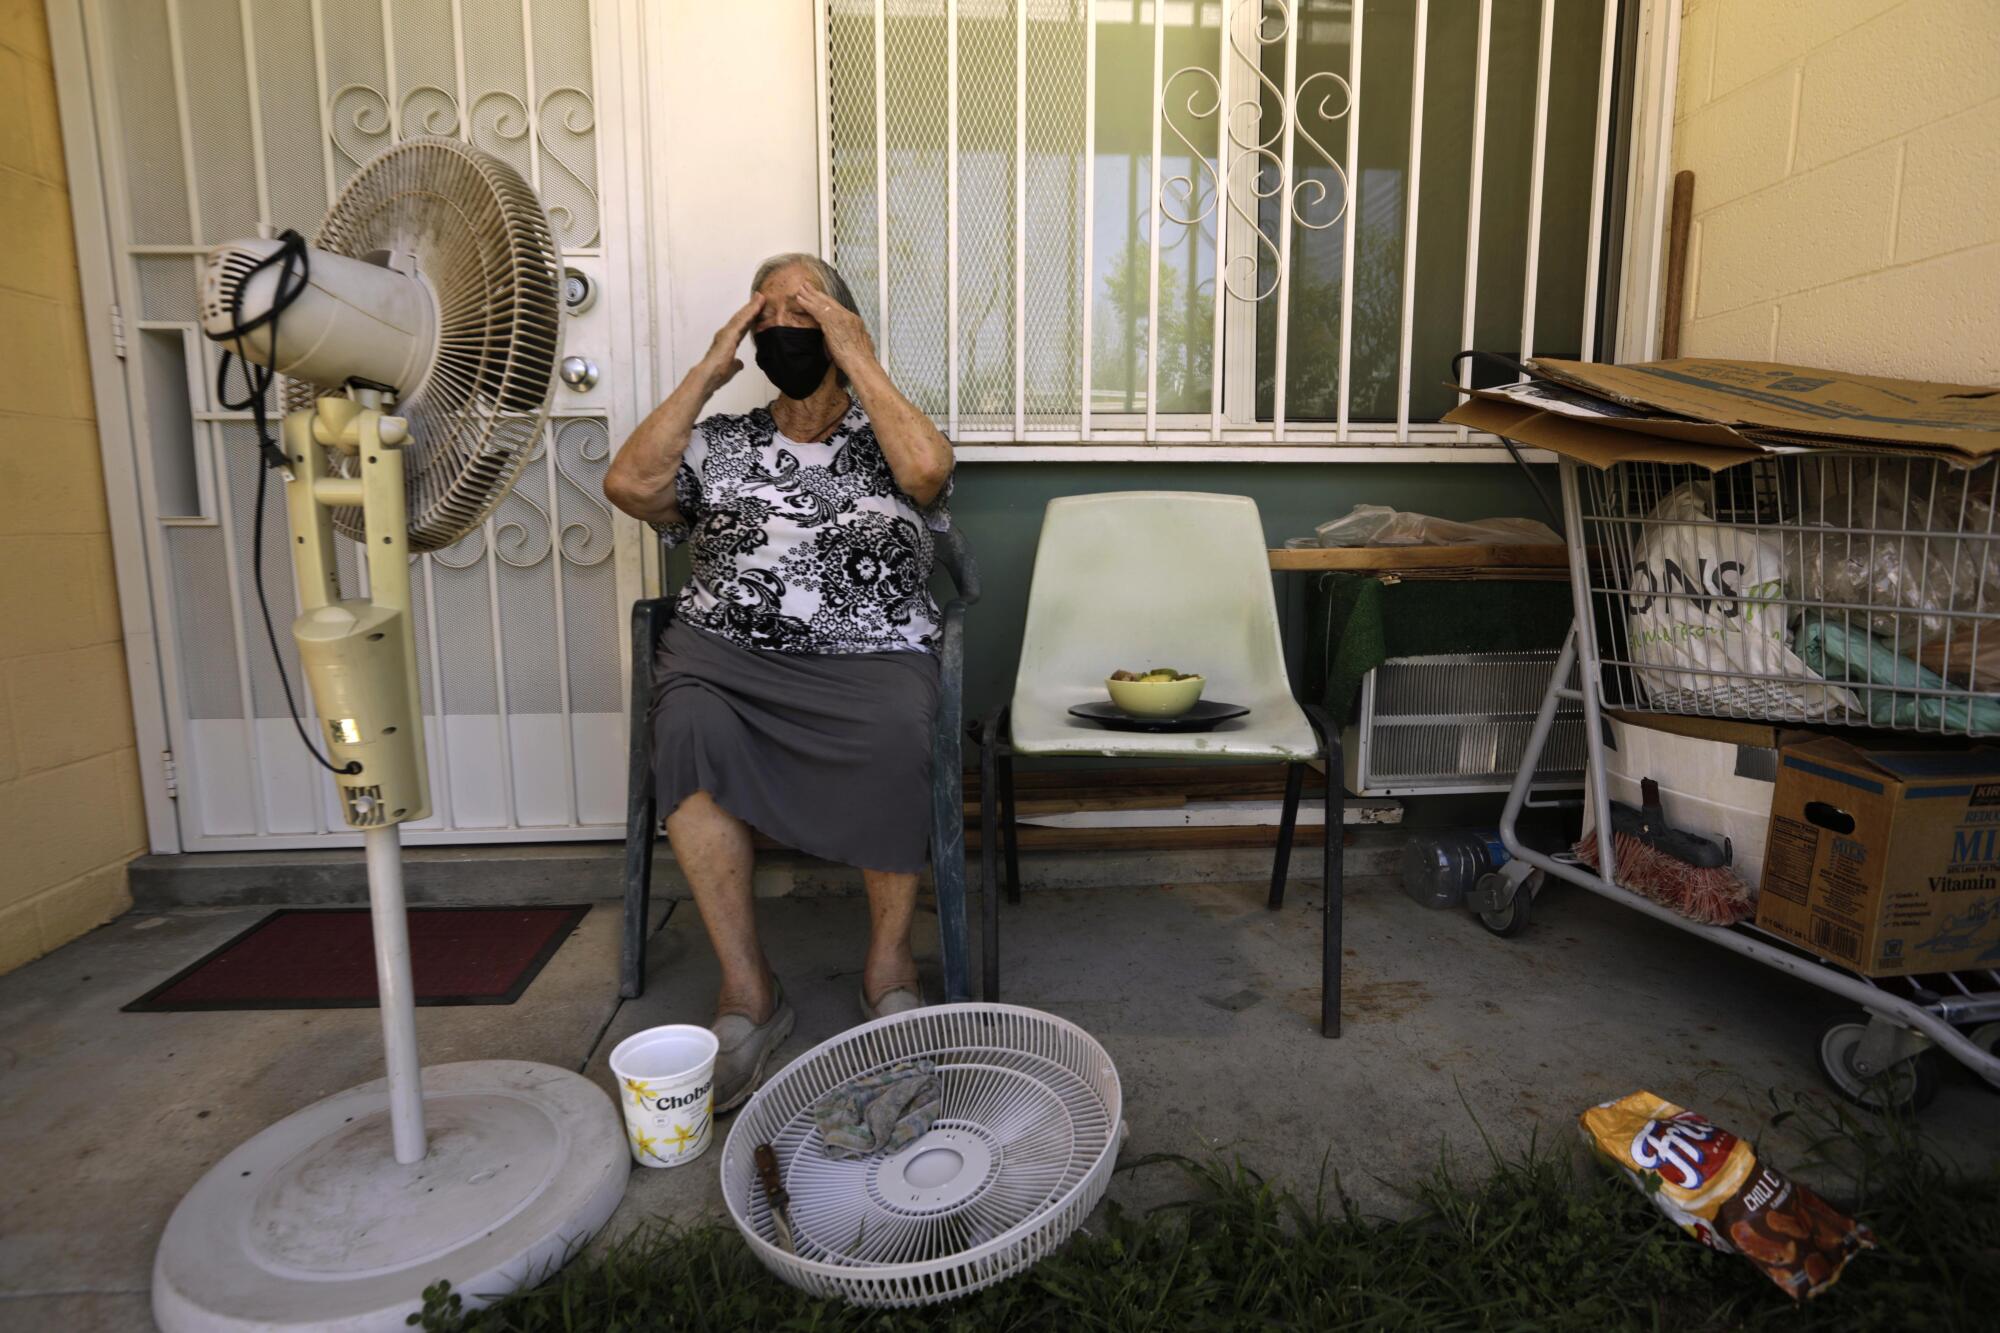 Felisa Benitez, 86, wipes the sweat from her brow while taking a break from cleaning her stand-up electrical fan.